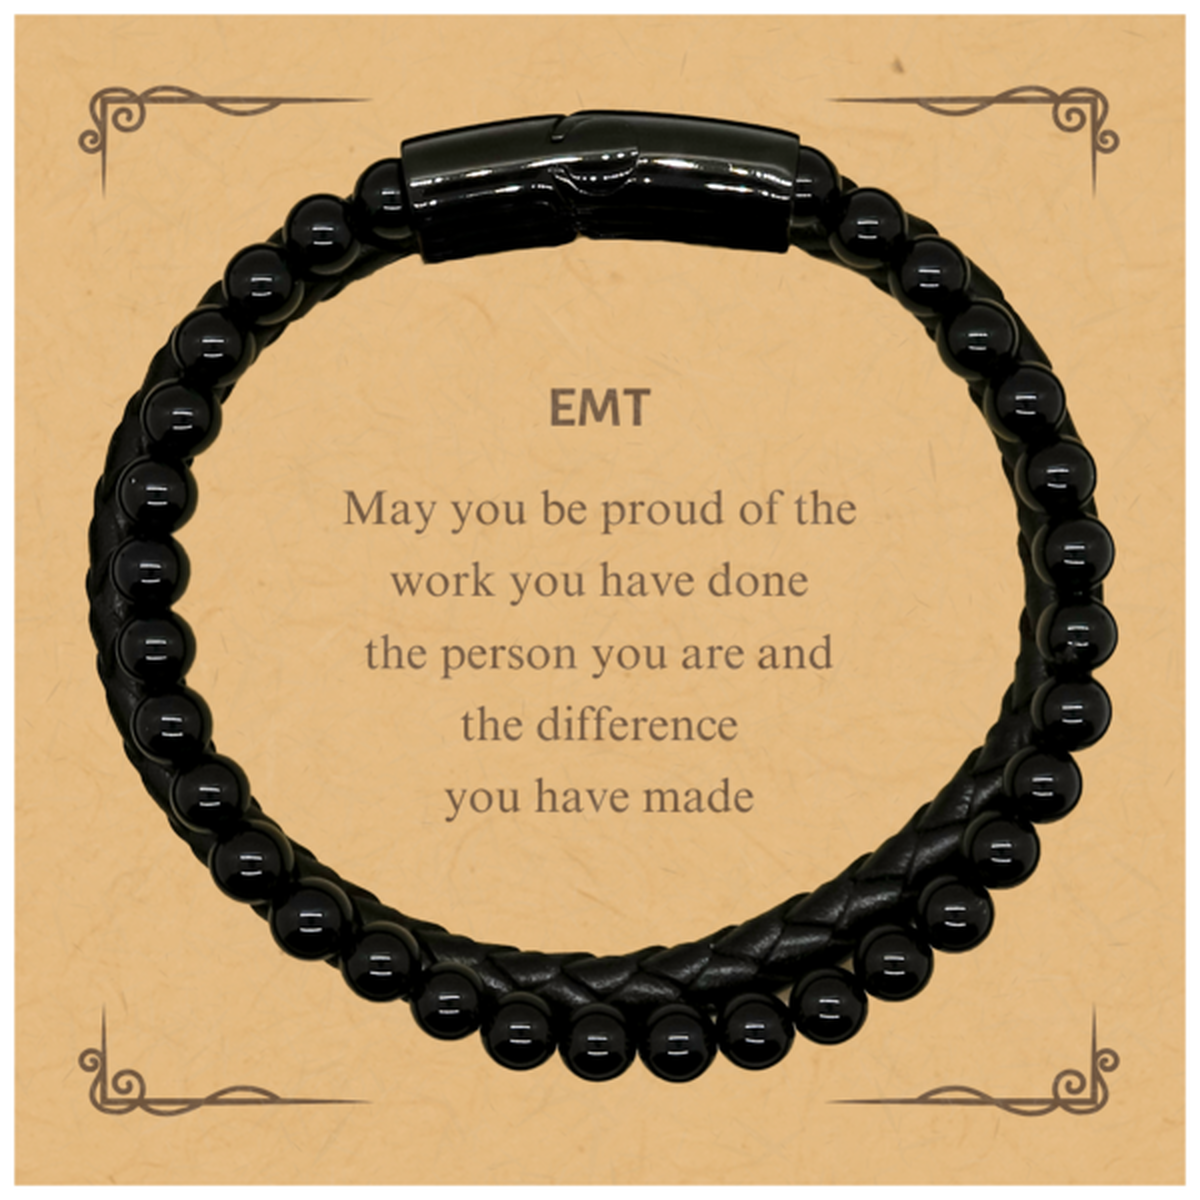 EMT May you be proud of the work you have done, Retirement EMT Stone Leather Bracelets for Colleague Appreciation Gifts Amazing for EMT